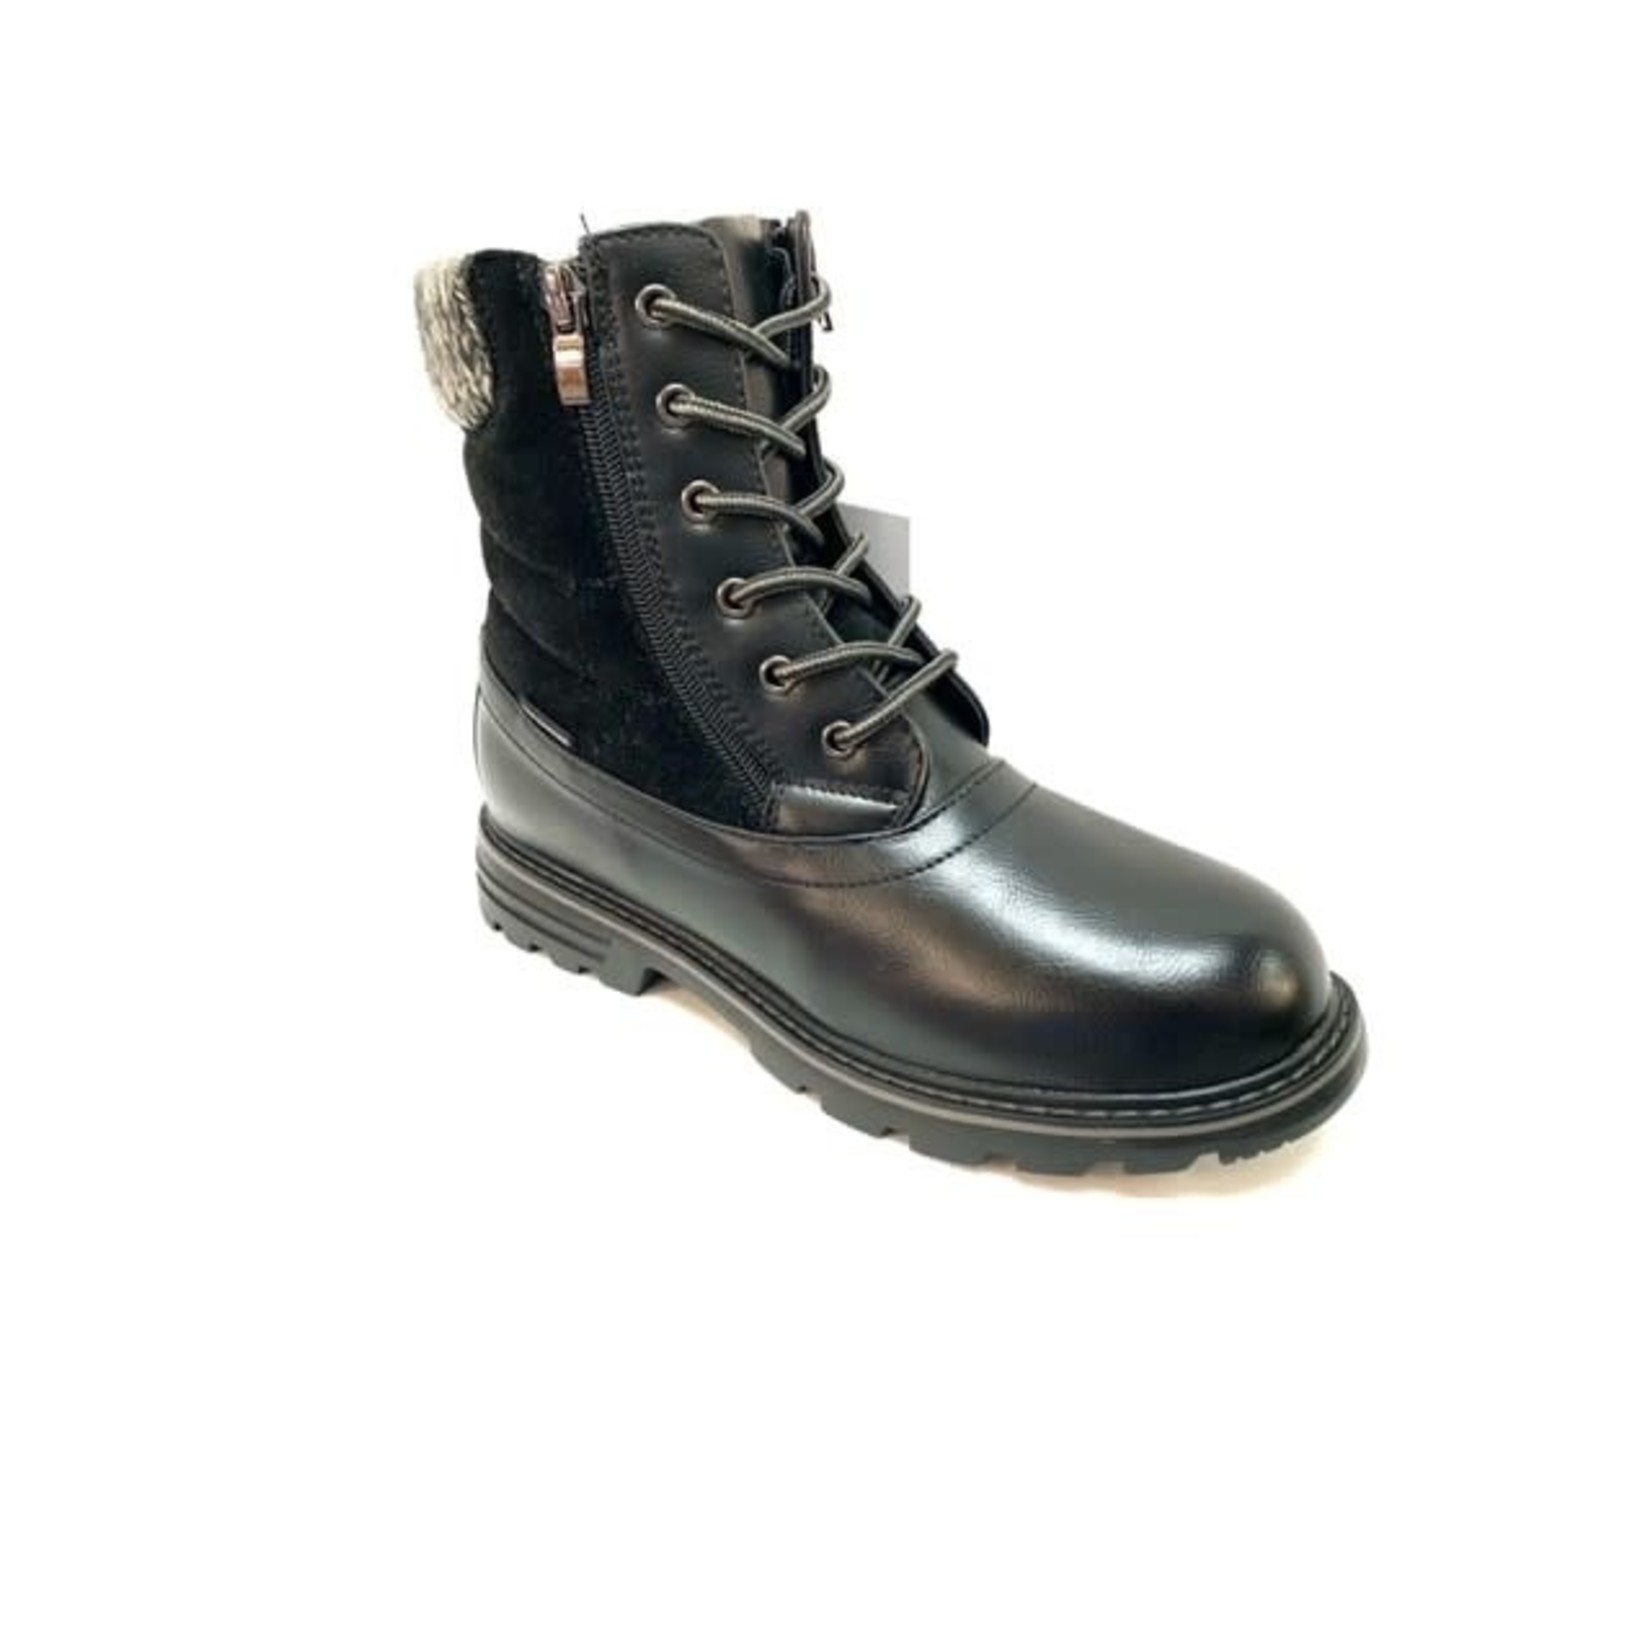 Xtra Dry ladies waterproof cleat boots with inside entry zipper, womans boots, footwear, boots